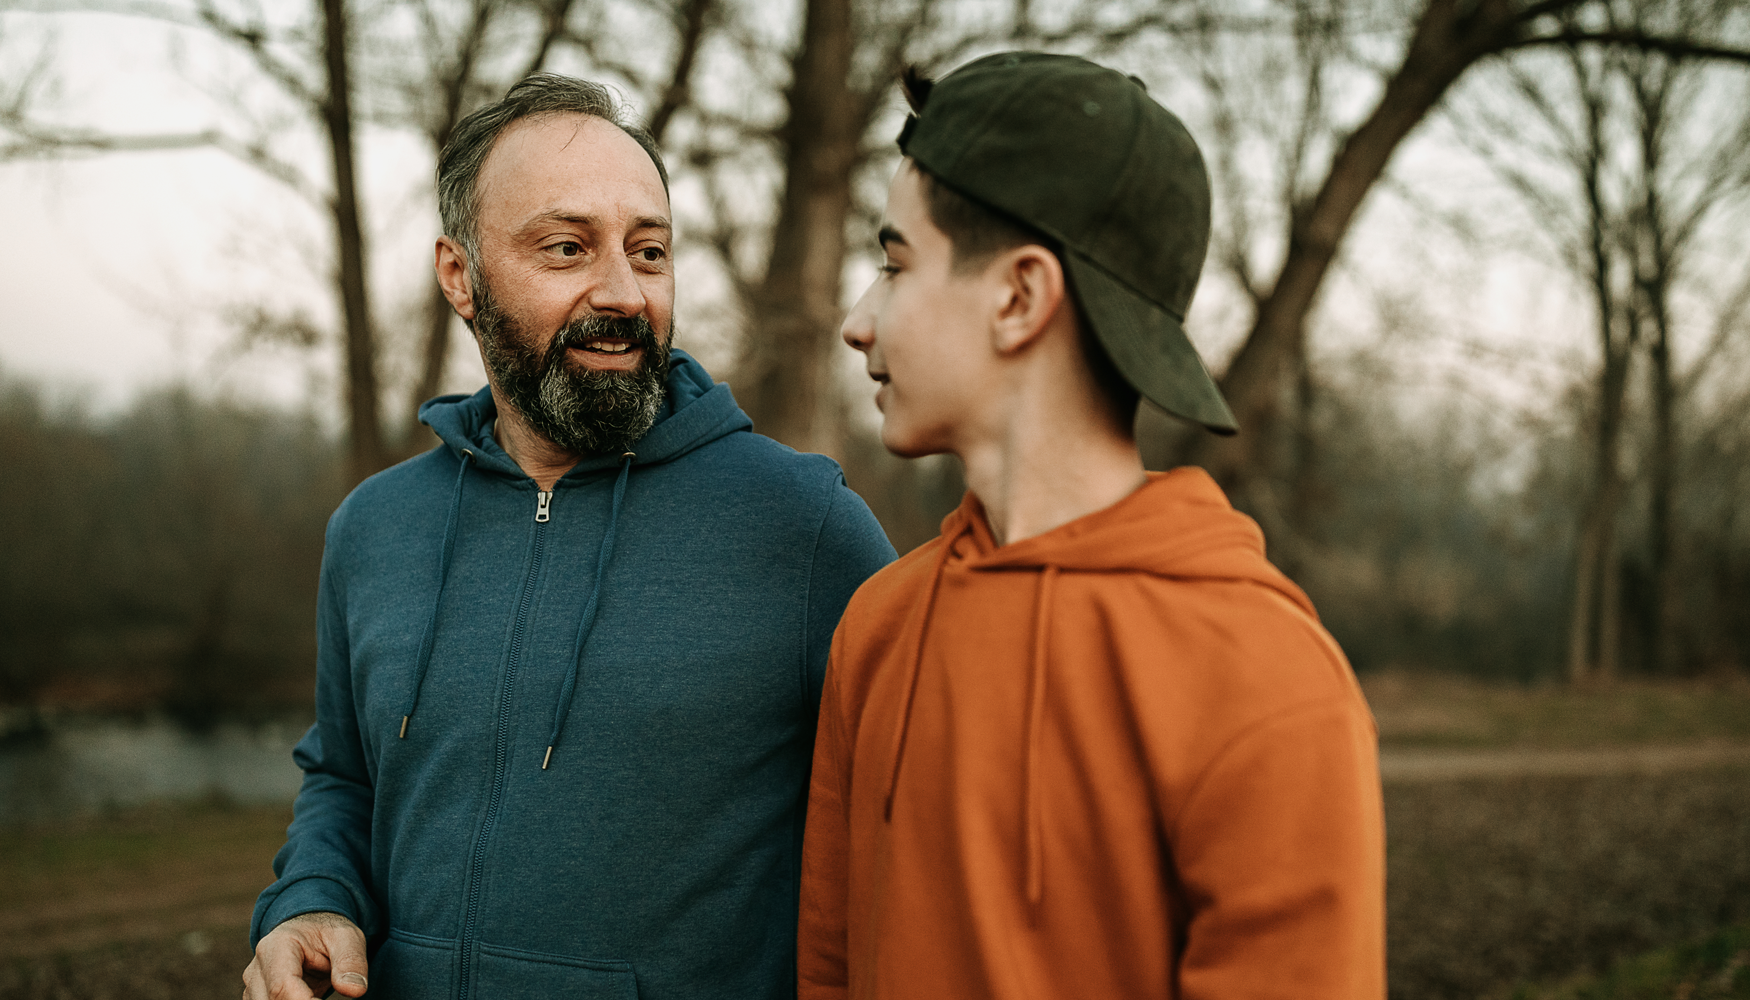 A photo of a man talking to a young teenage boy. He could be either a counsellor talking to one of his clients or a dad speaking to his son.